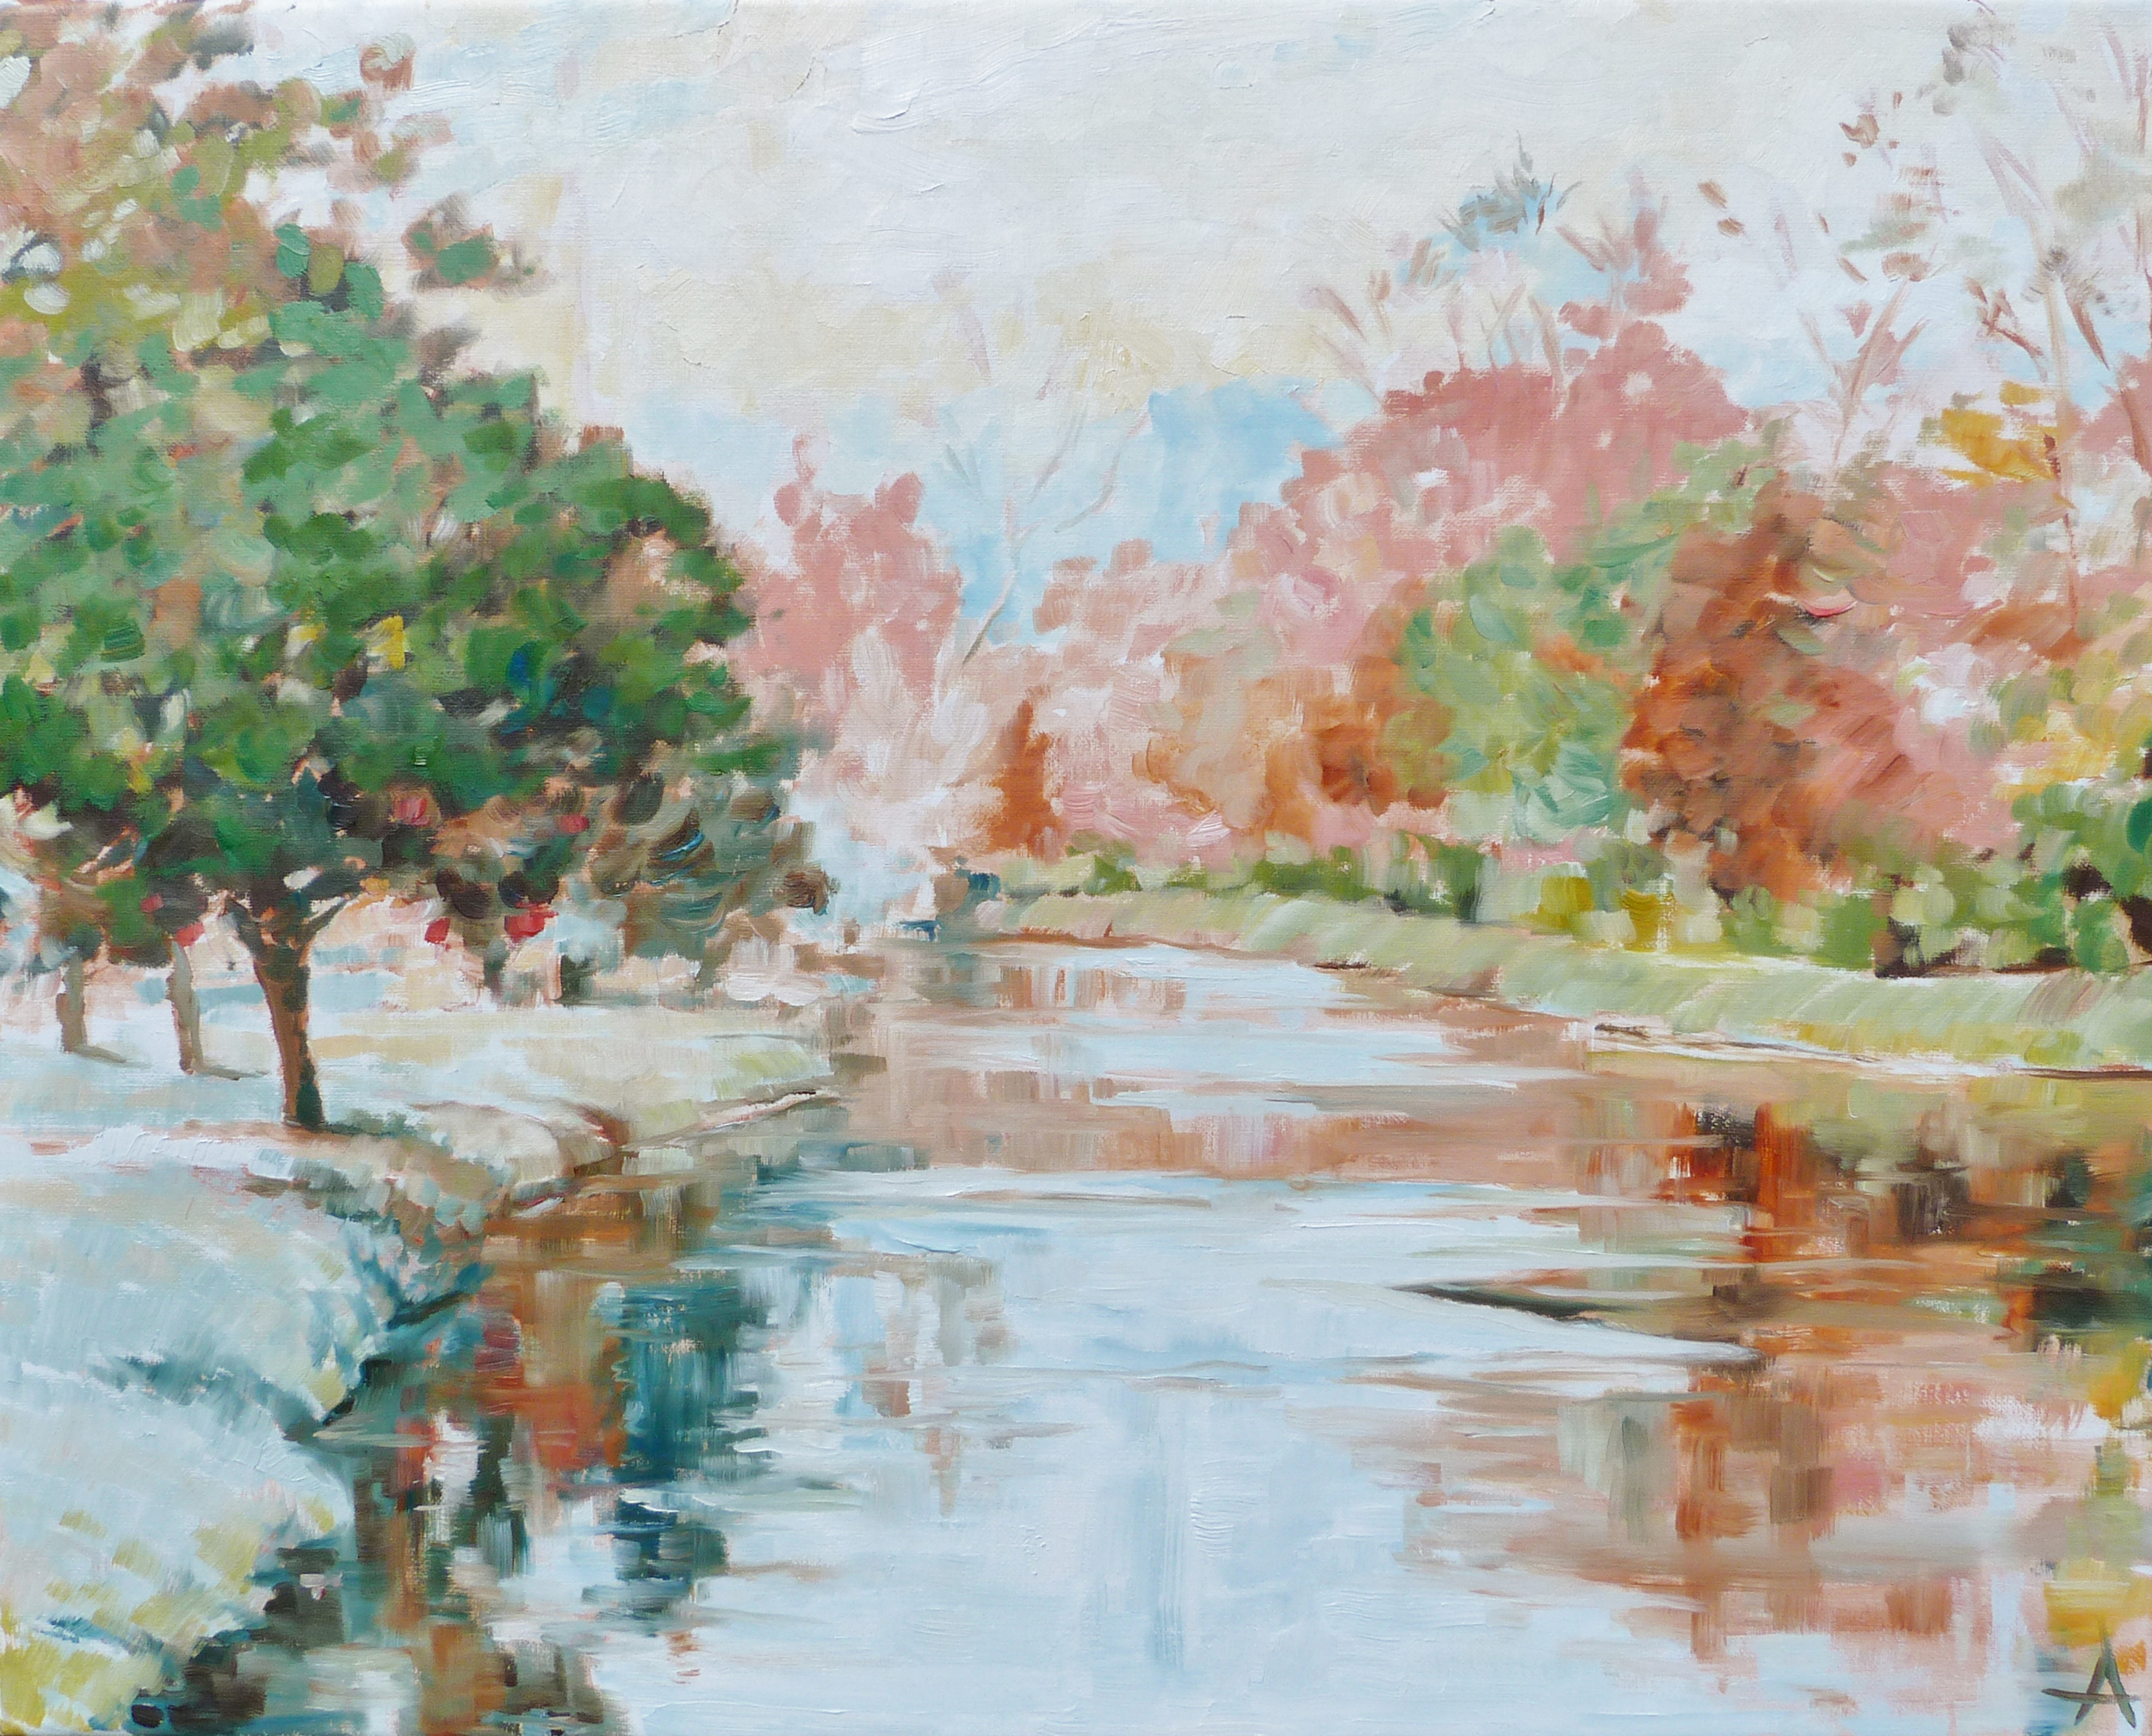 SOLD, April on the Canal, Copyright 2013 Hirschten, Oil on Canvas, 16" x 20"